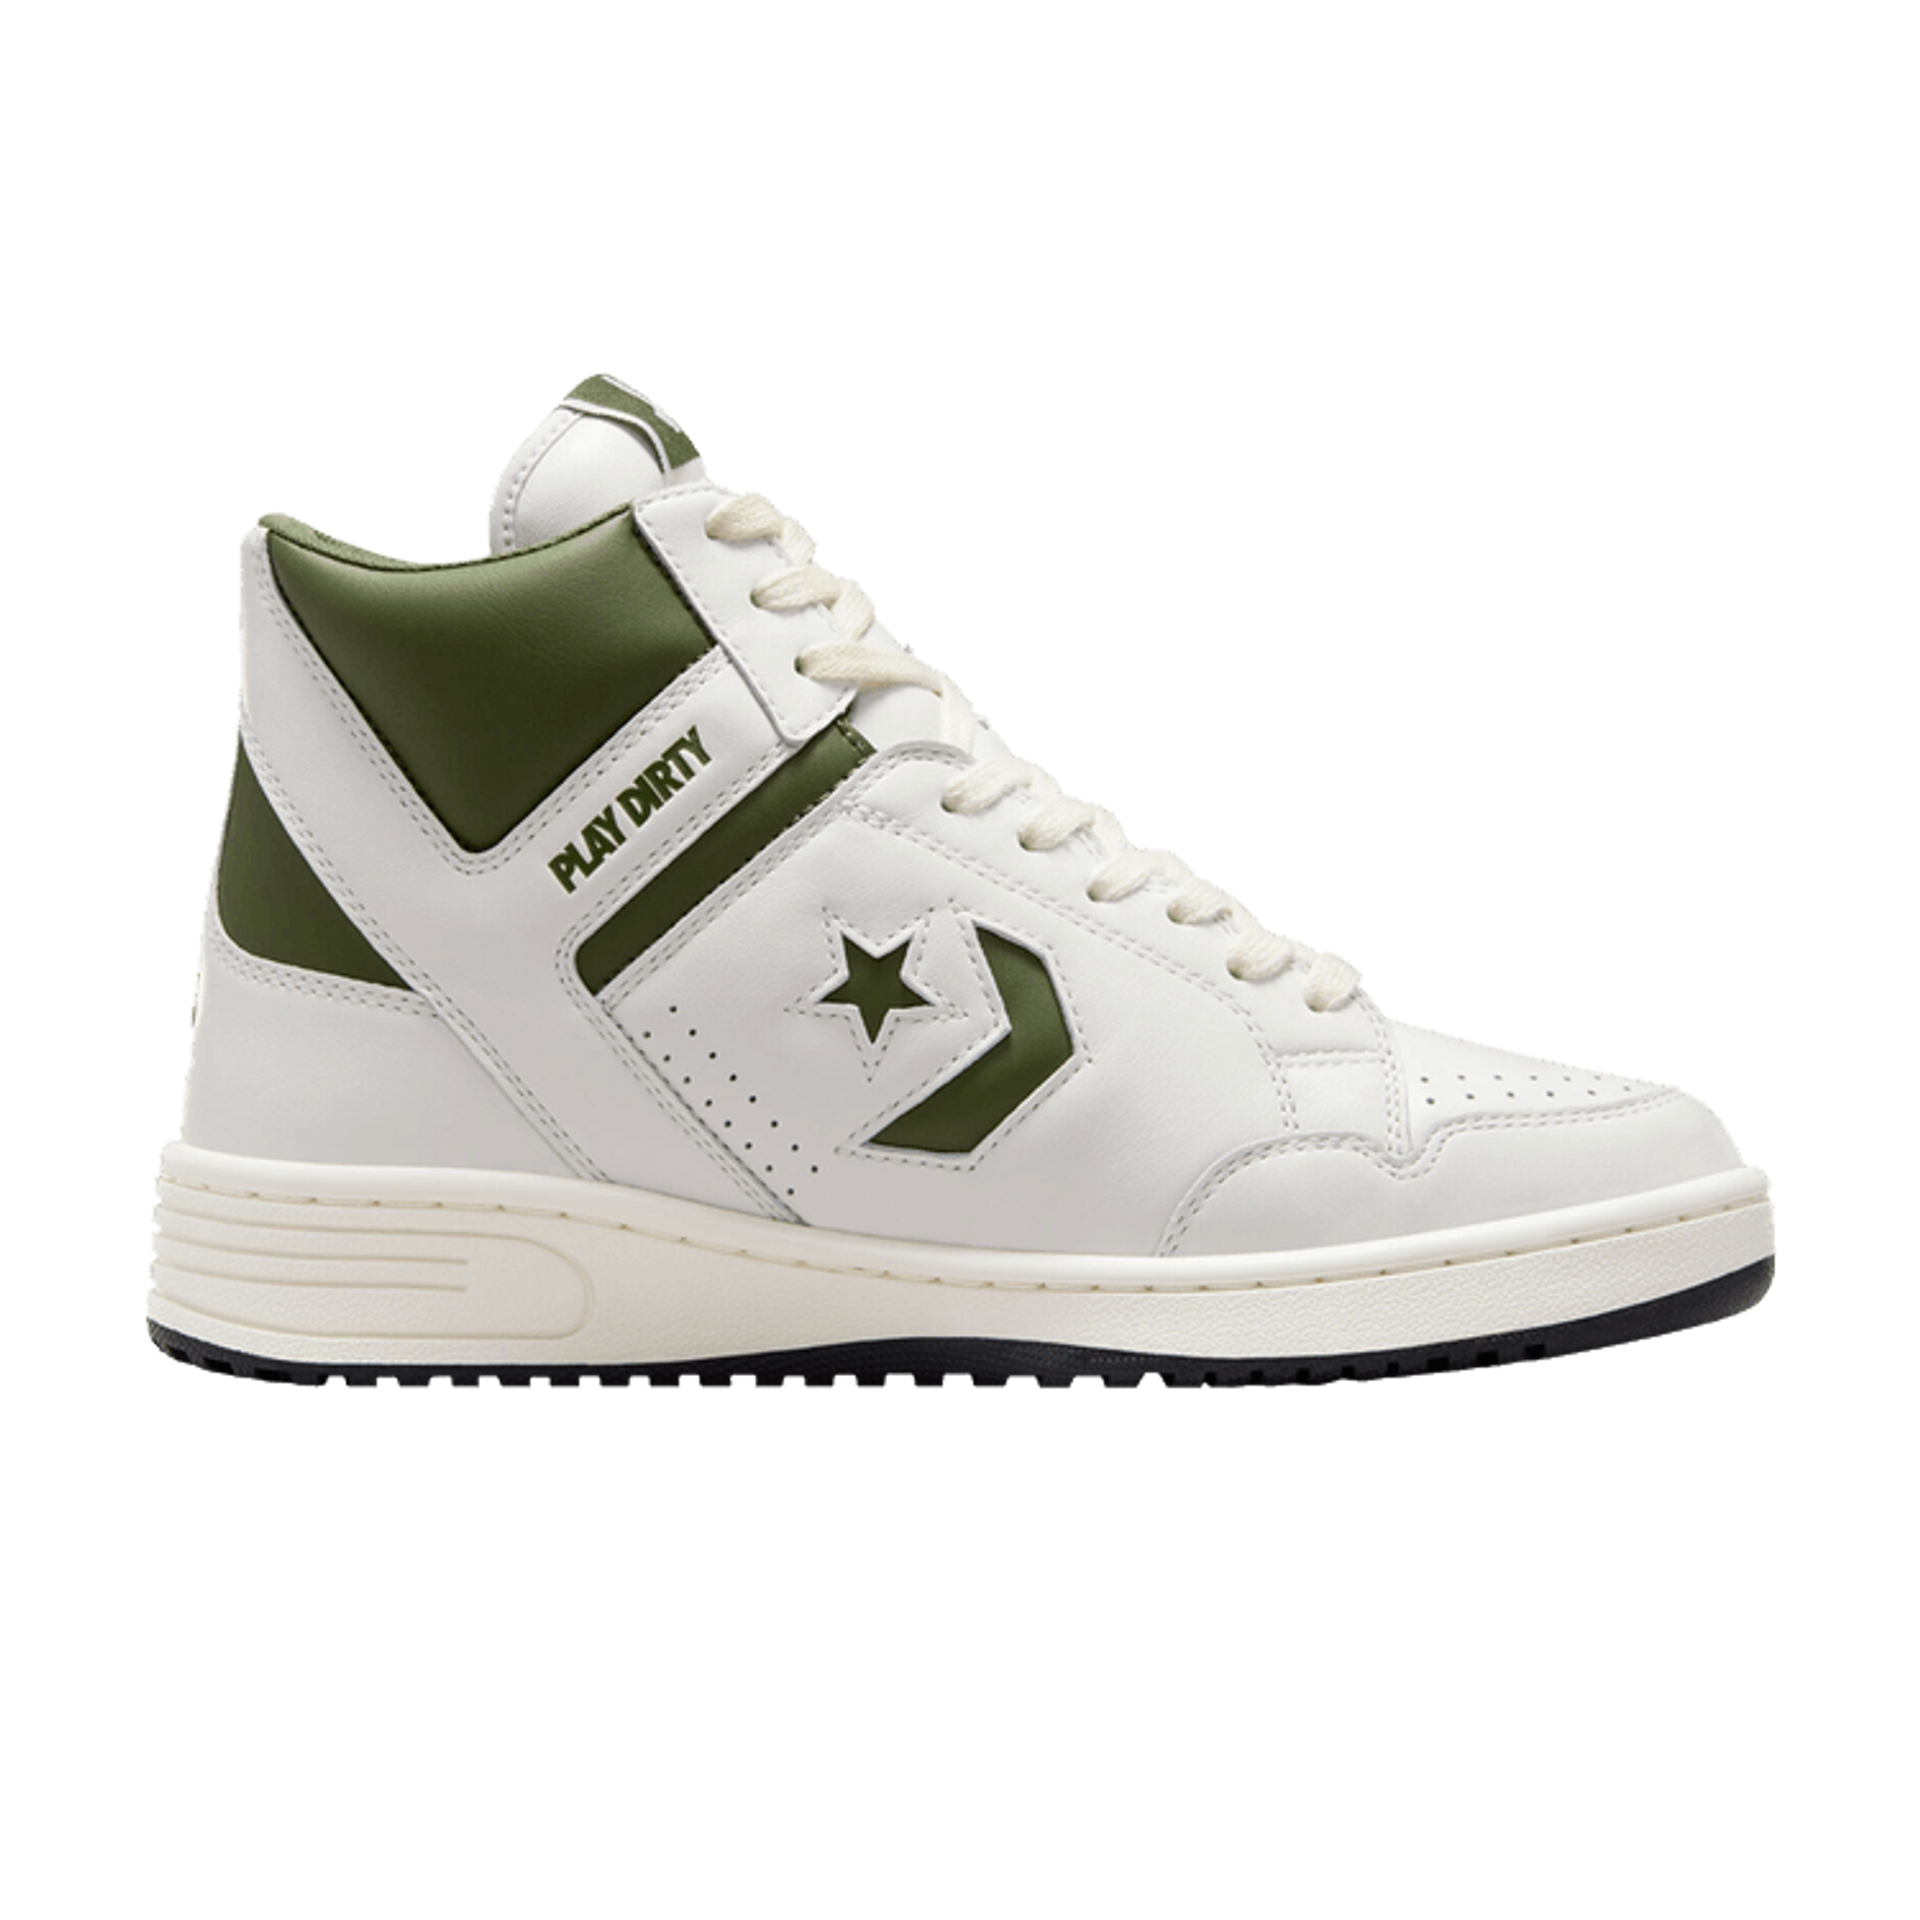 Undefeated x Converse Weapon High 'Chive'